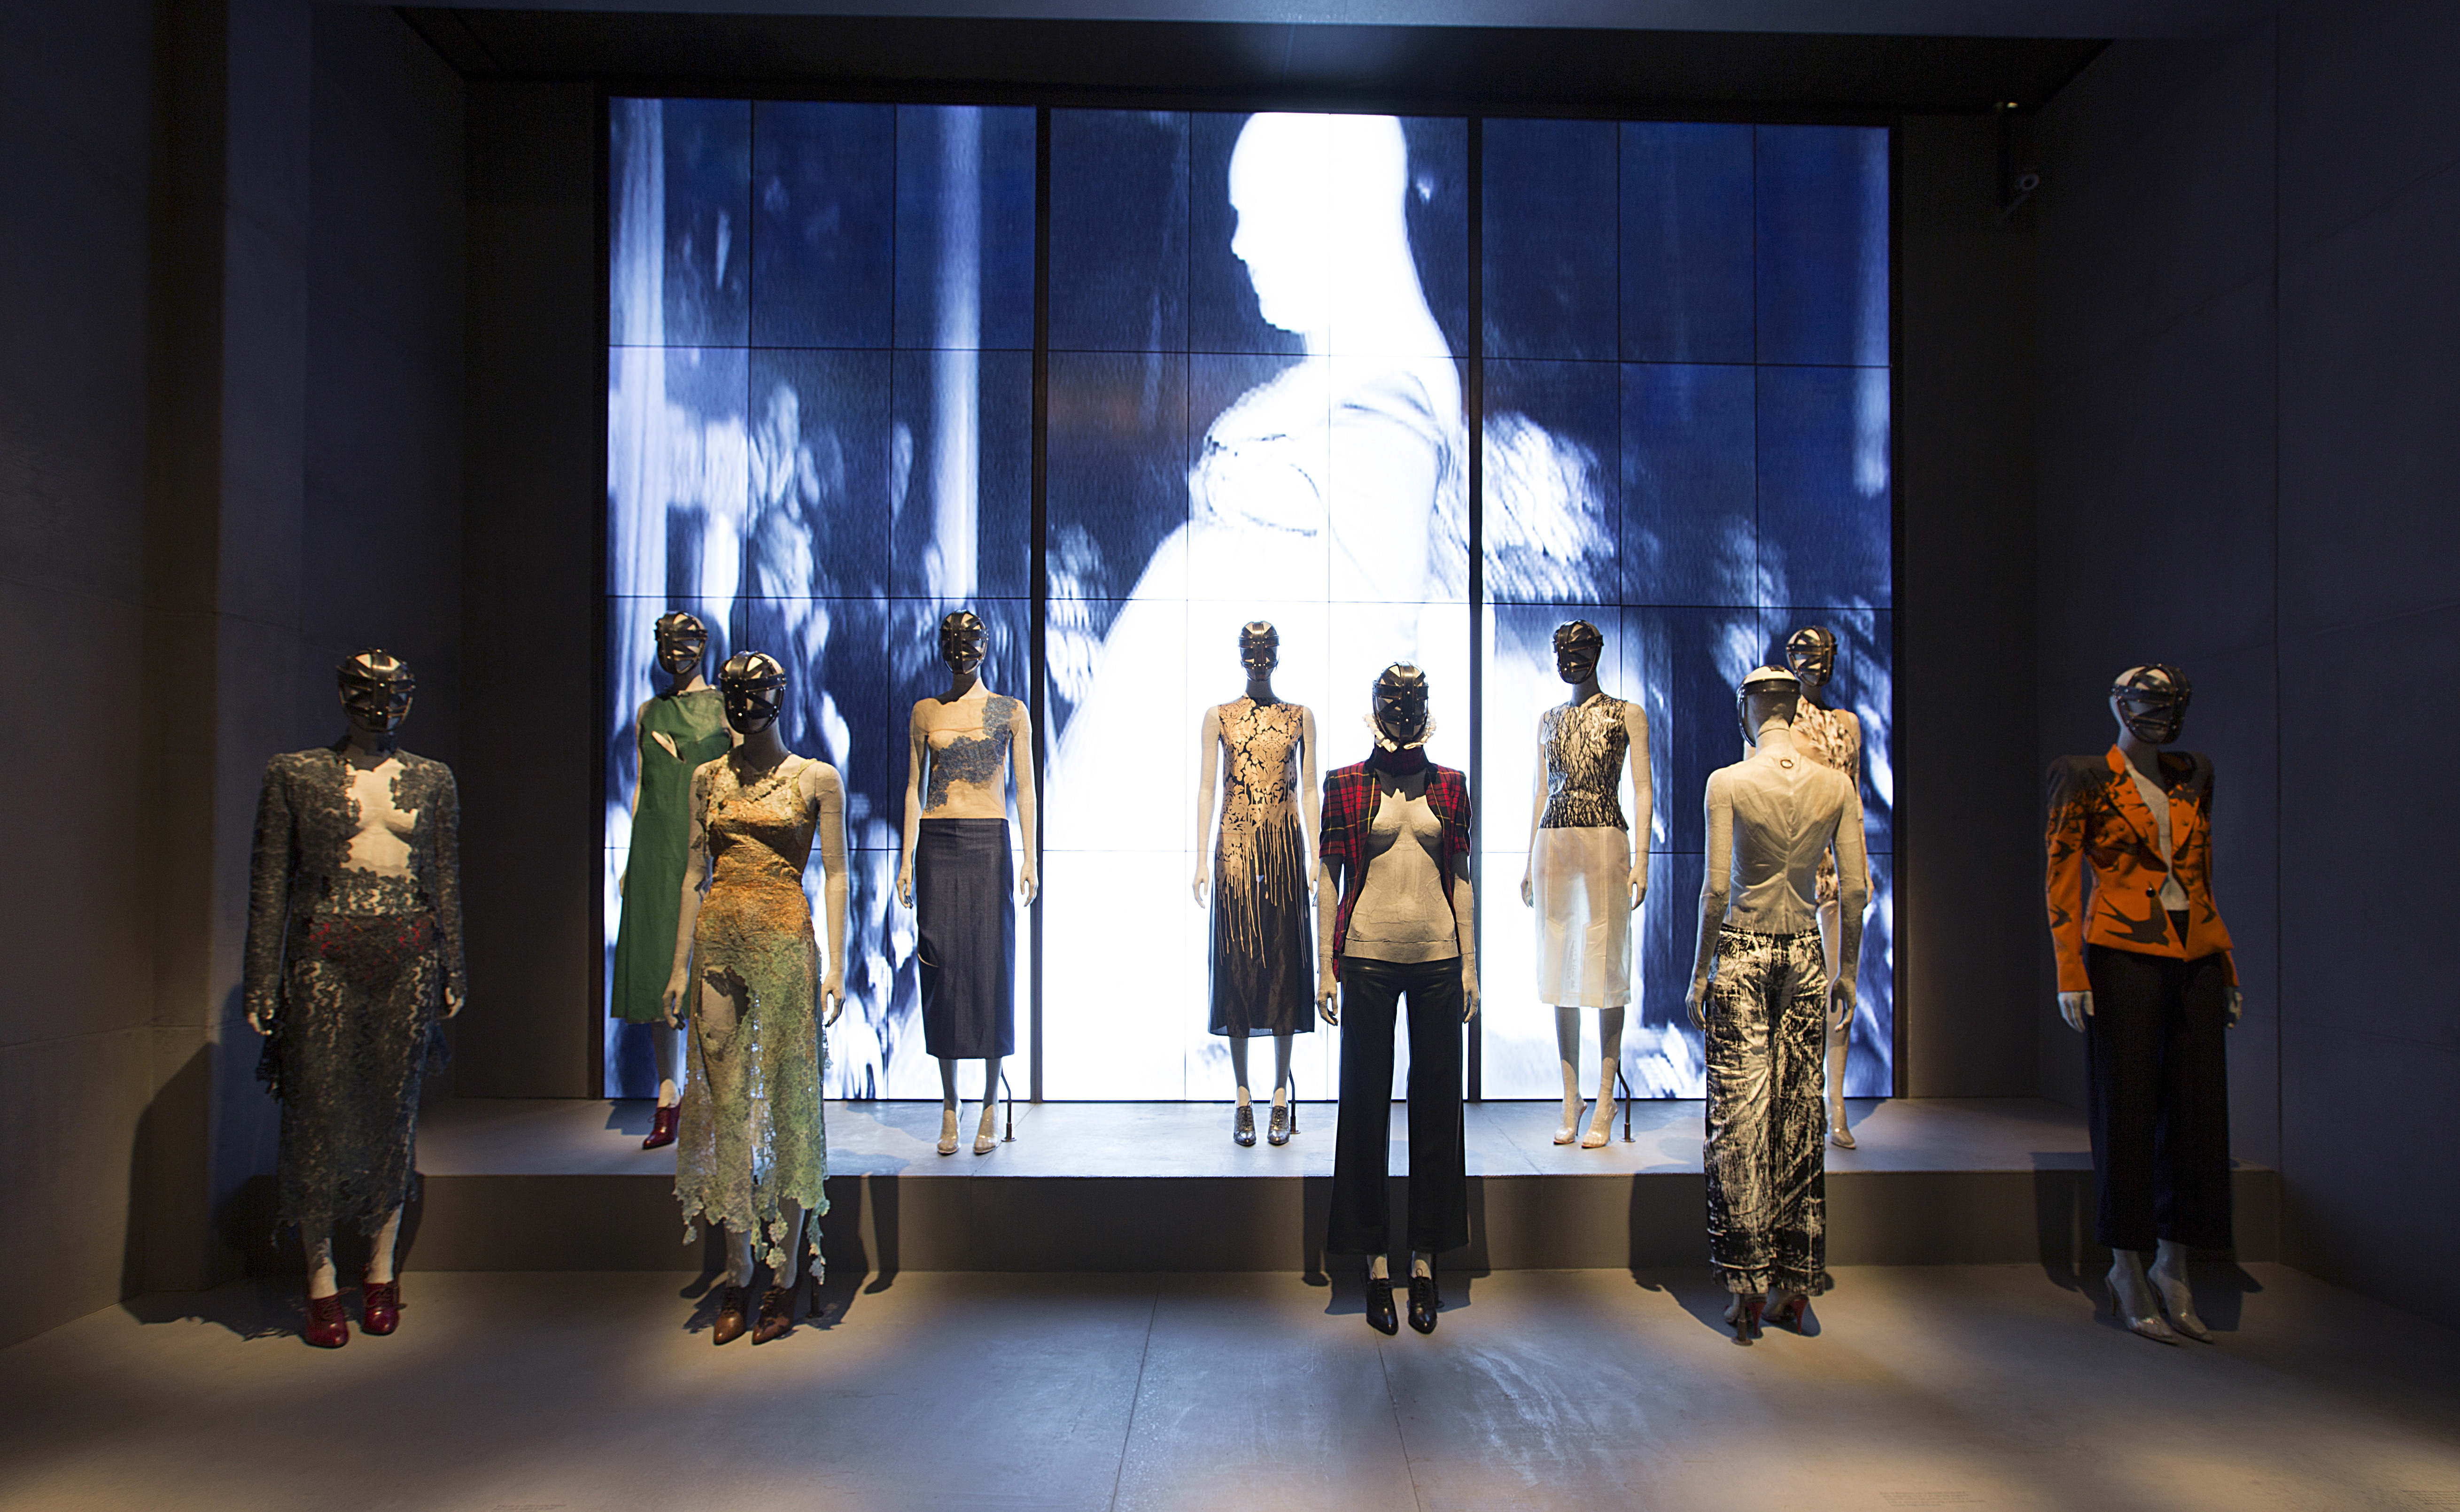 1._Installation_view_of_London_gallery_Alexander_McQueen_Savage_Beauty_at_the_VA_c_Victoria_and_Albert_Museum_London